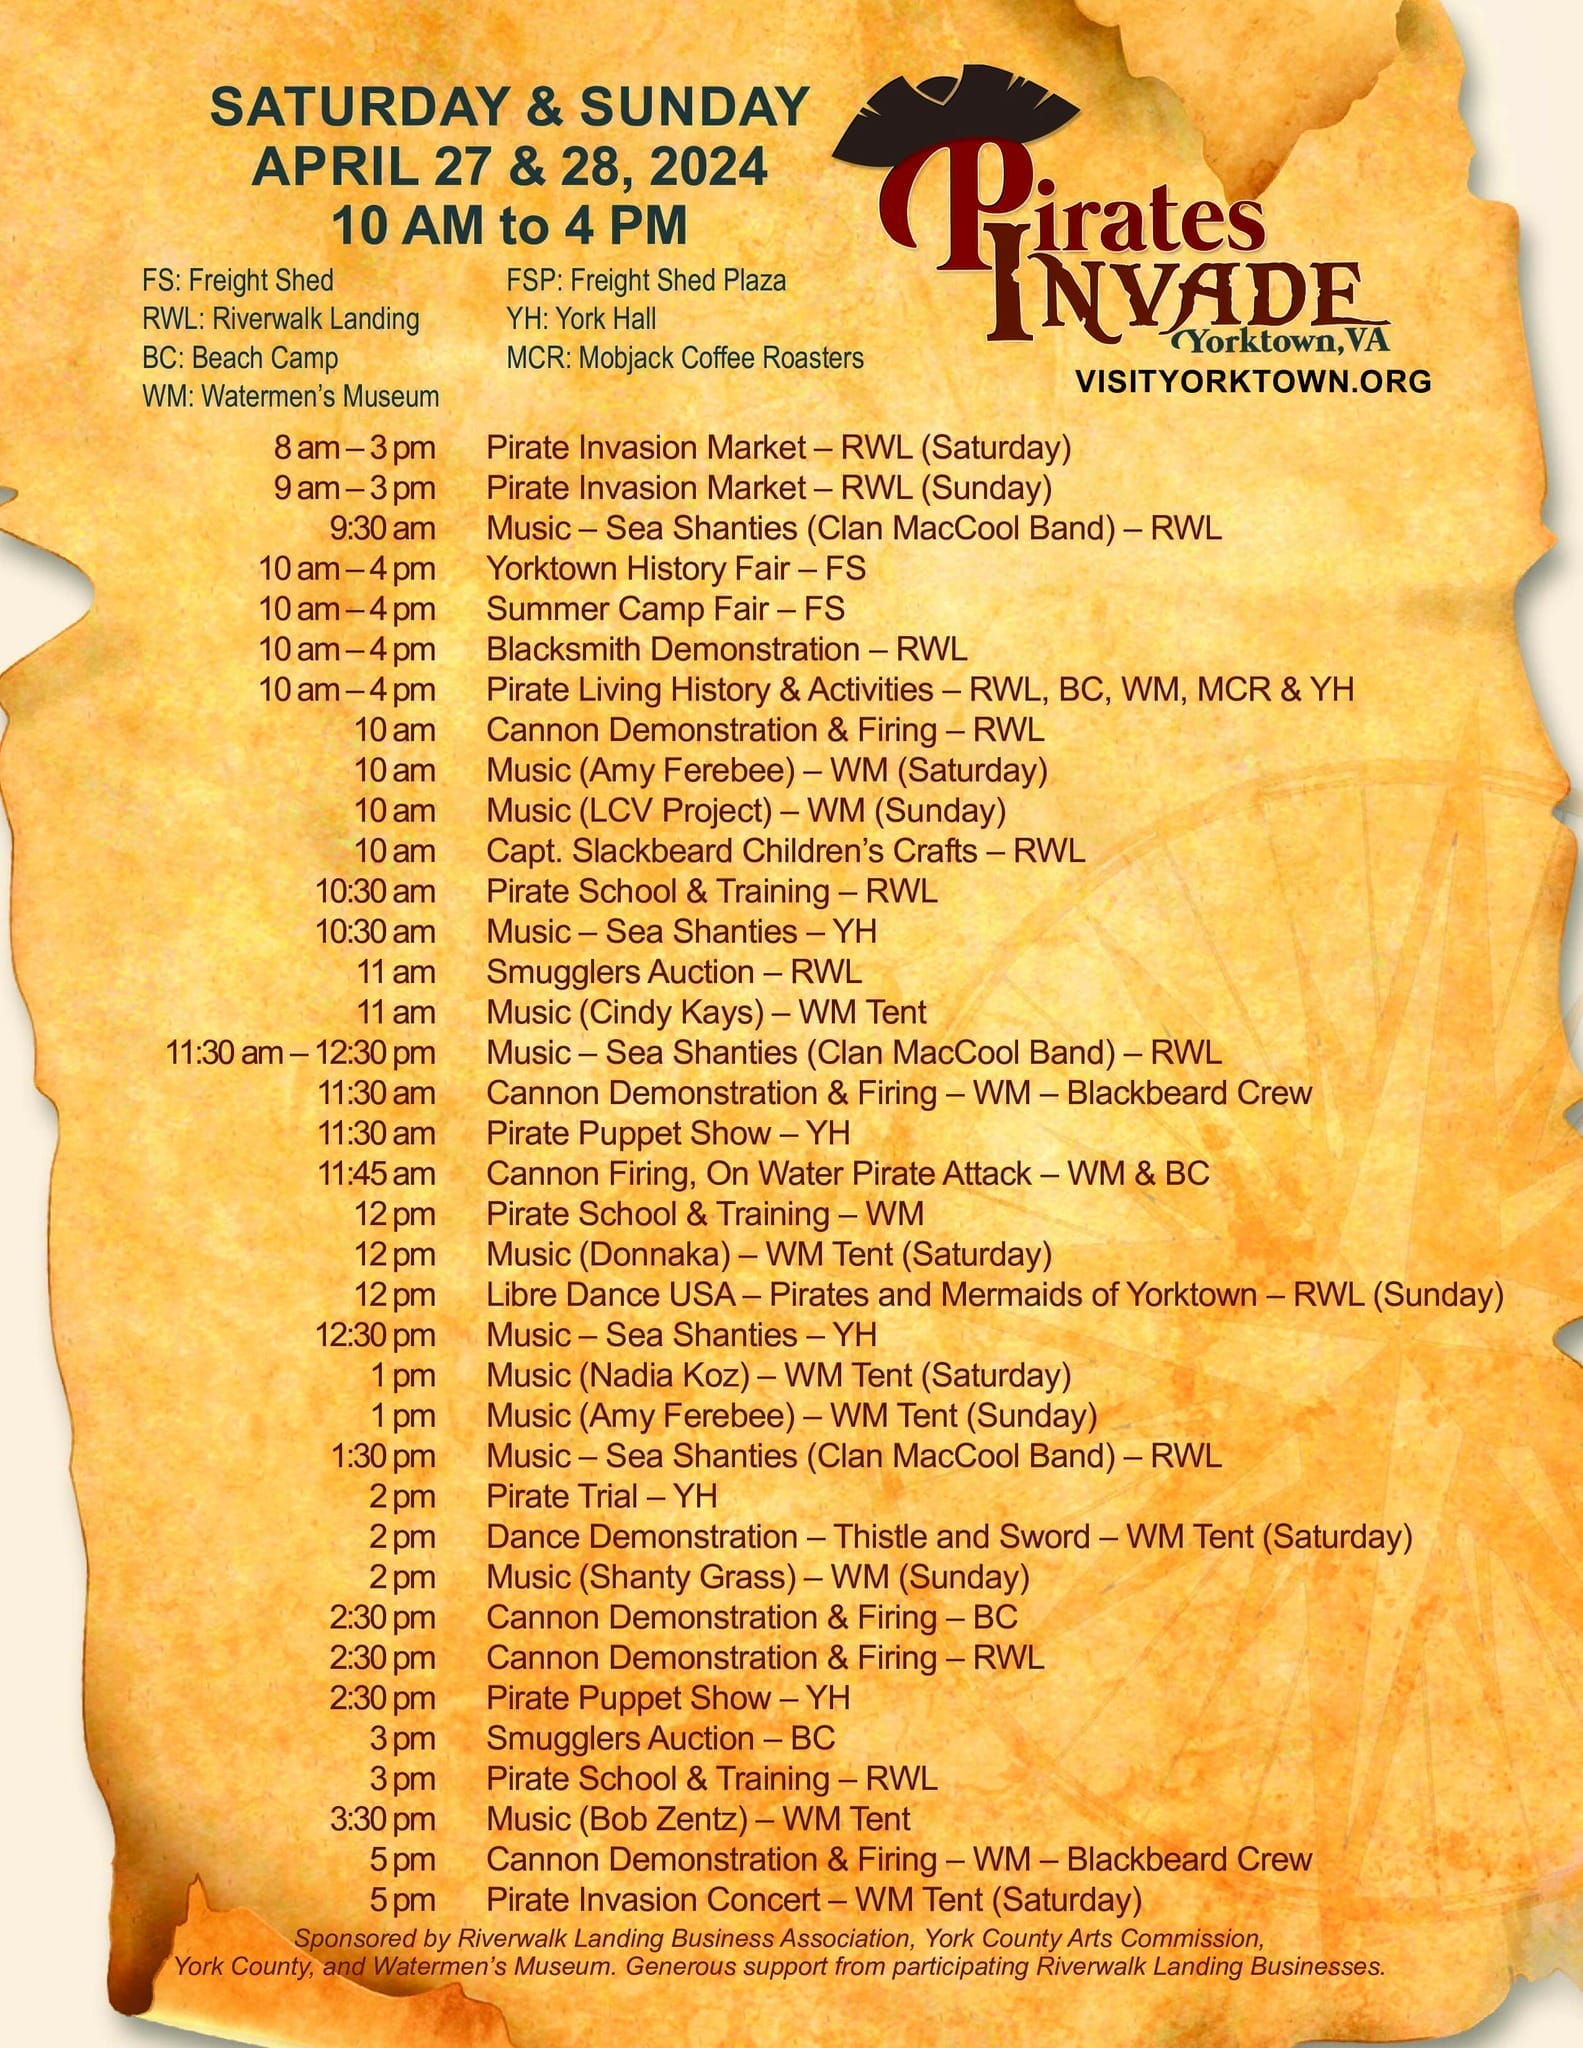 Document created to look like an old scroll with activities listed as a part of the Pirates Invade Yorktown event in Yorktown Virginia